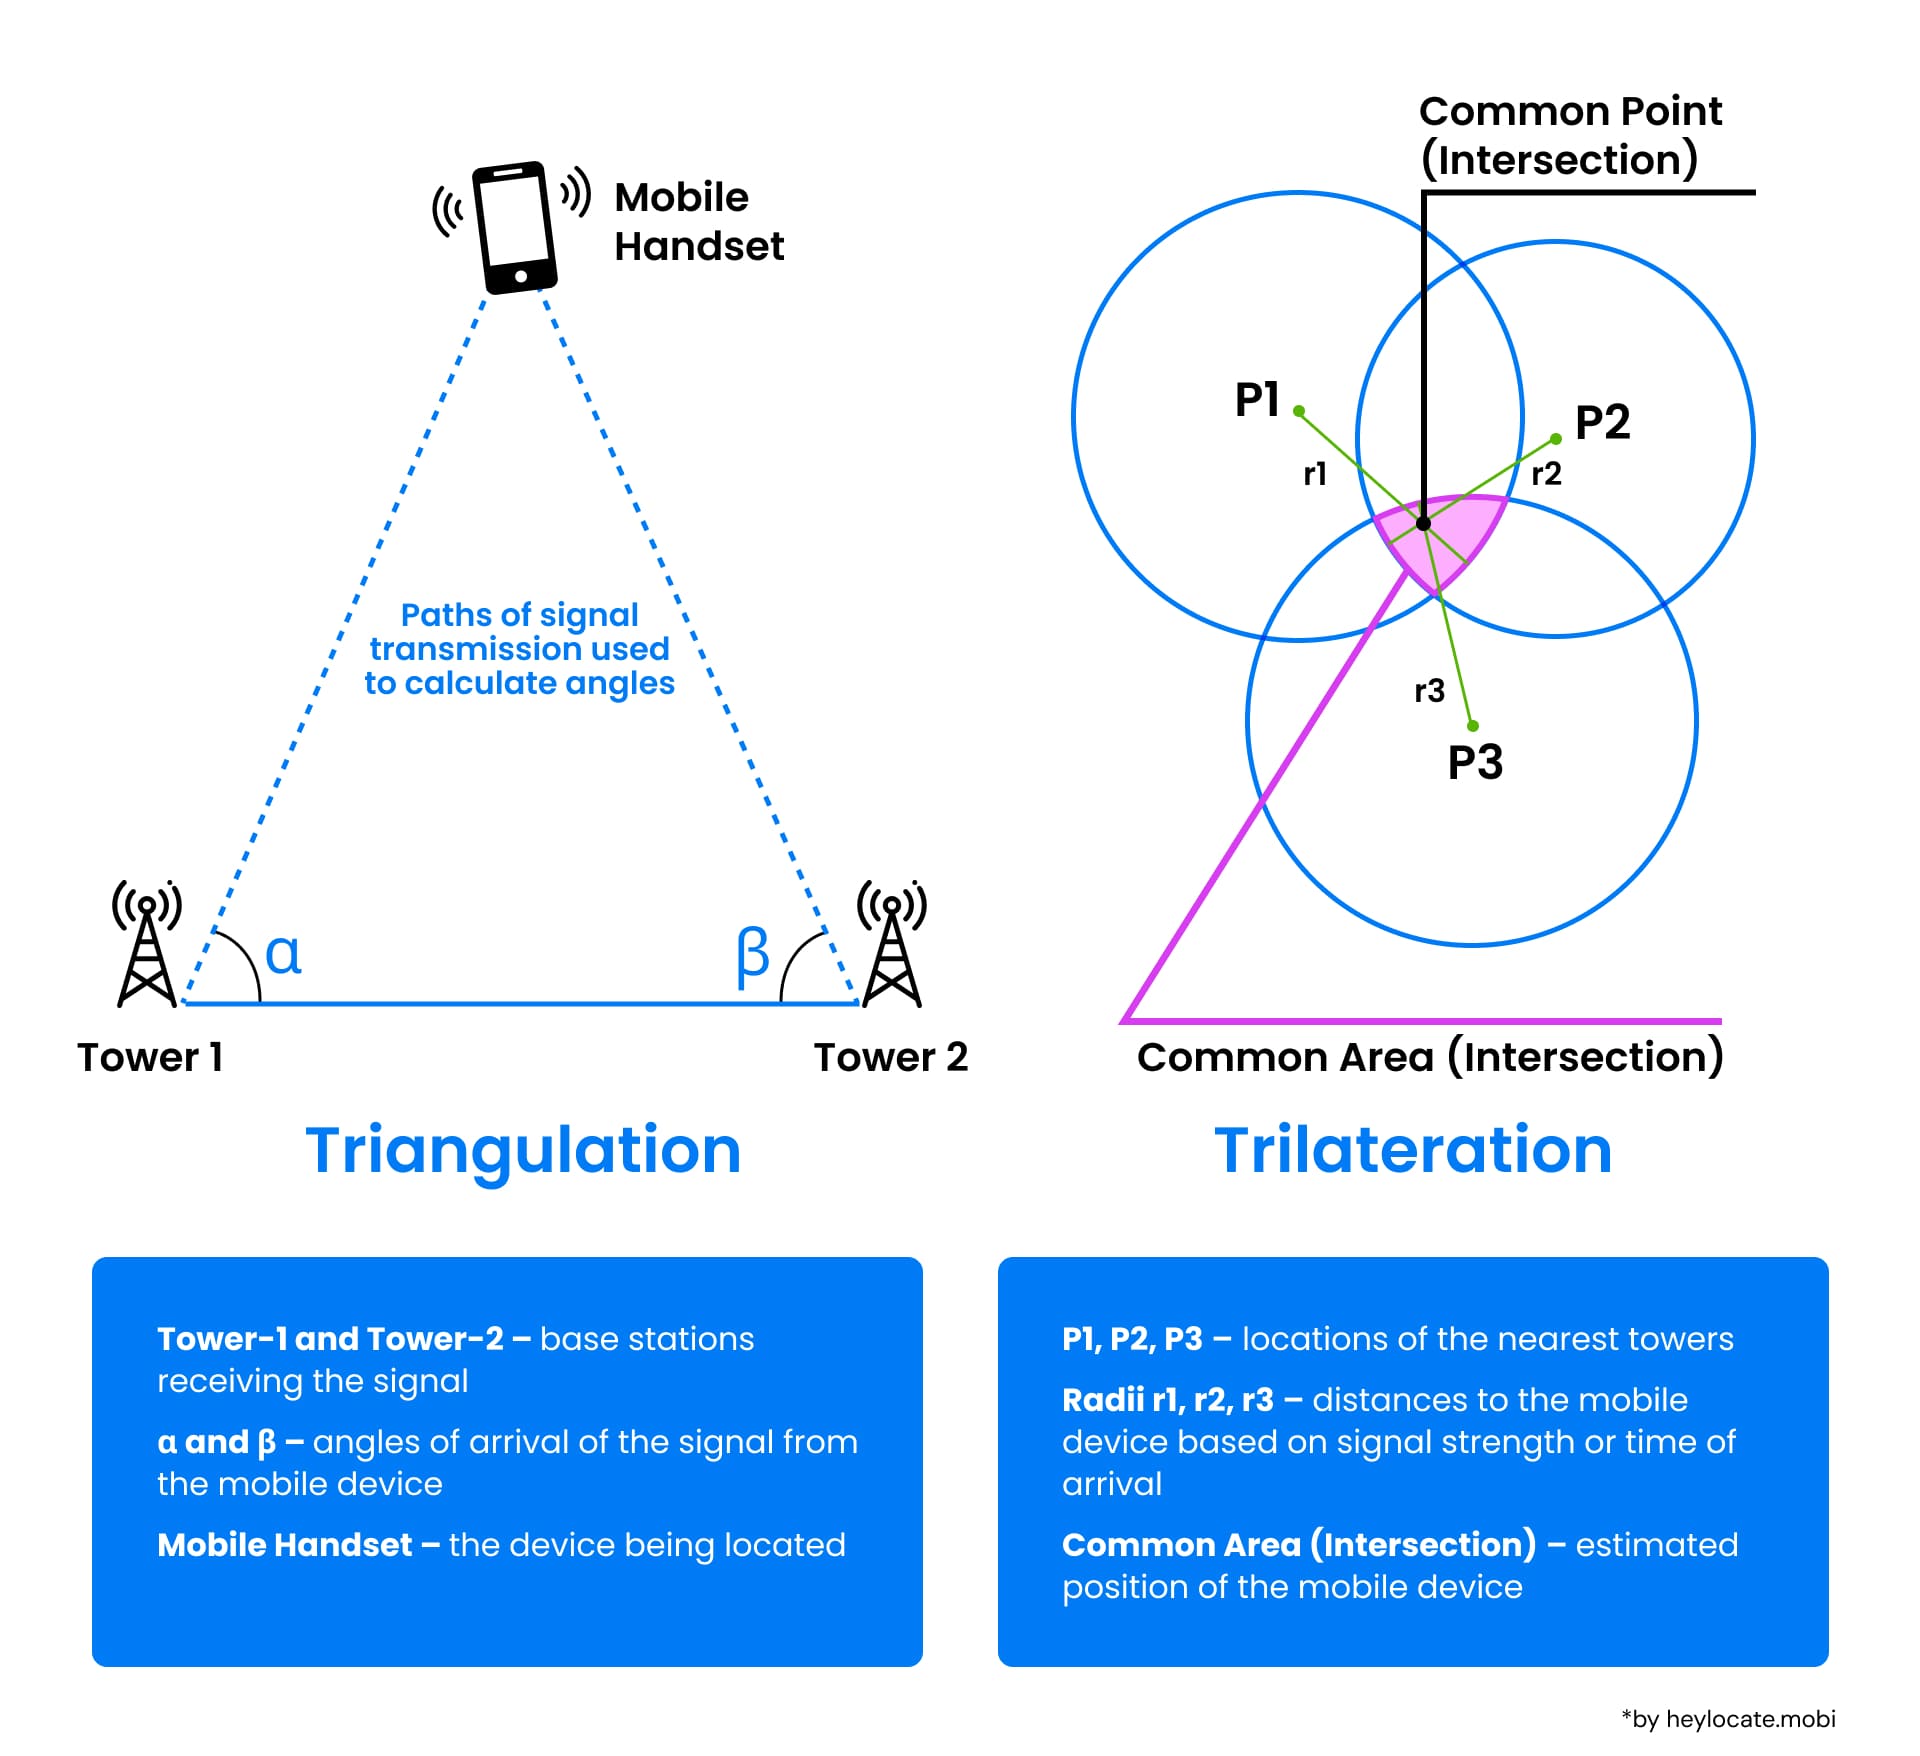 Comparative illustration of triangulation versus trilateration techniques used in mobile networks for handset location using the angles and intersections of signals from cell towers, with an explanatory note